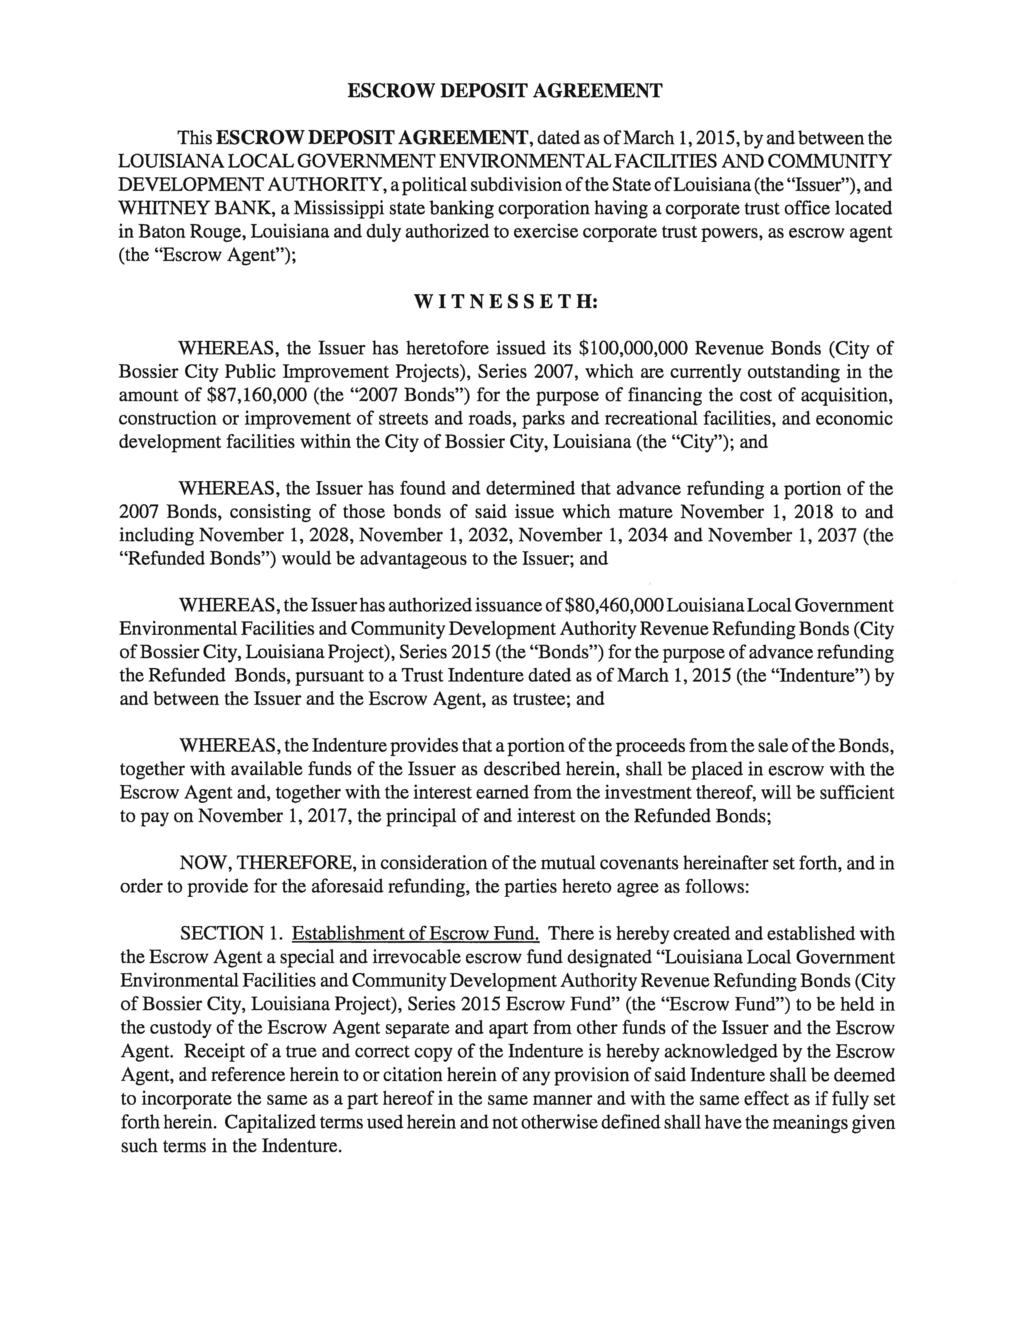 ESCROW DEPOSIT AGREEMENT This ESCROW DEPOSIT AGREEMENT, dated as of March 1, 2015, by and between the LOUISIANA LOCAL GOVERNMENT ENVIRONMENTAL FACILITIES AND COMMUNITY DEVELOPMENT AUTHORITY, a